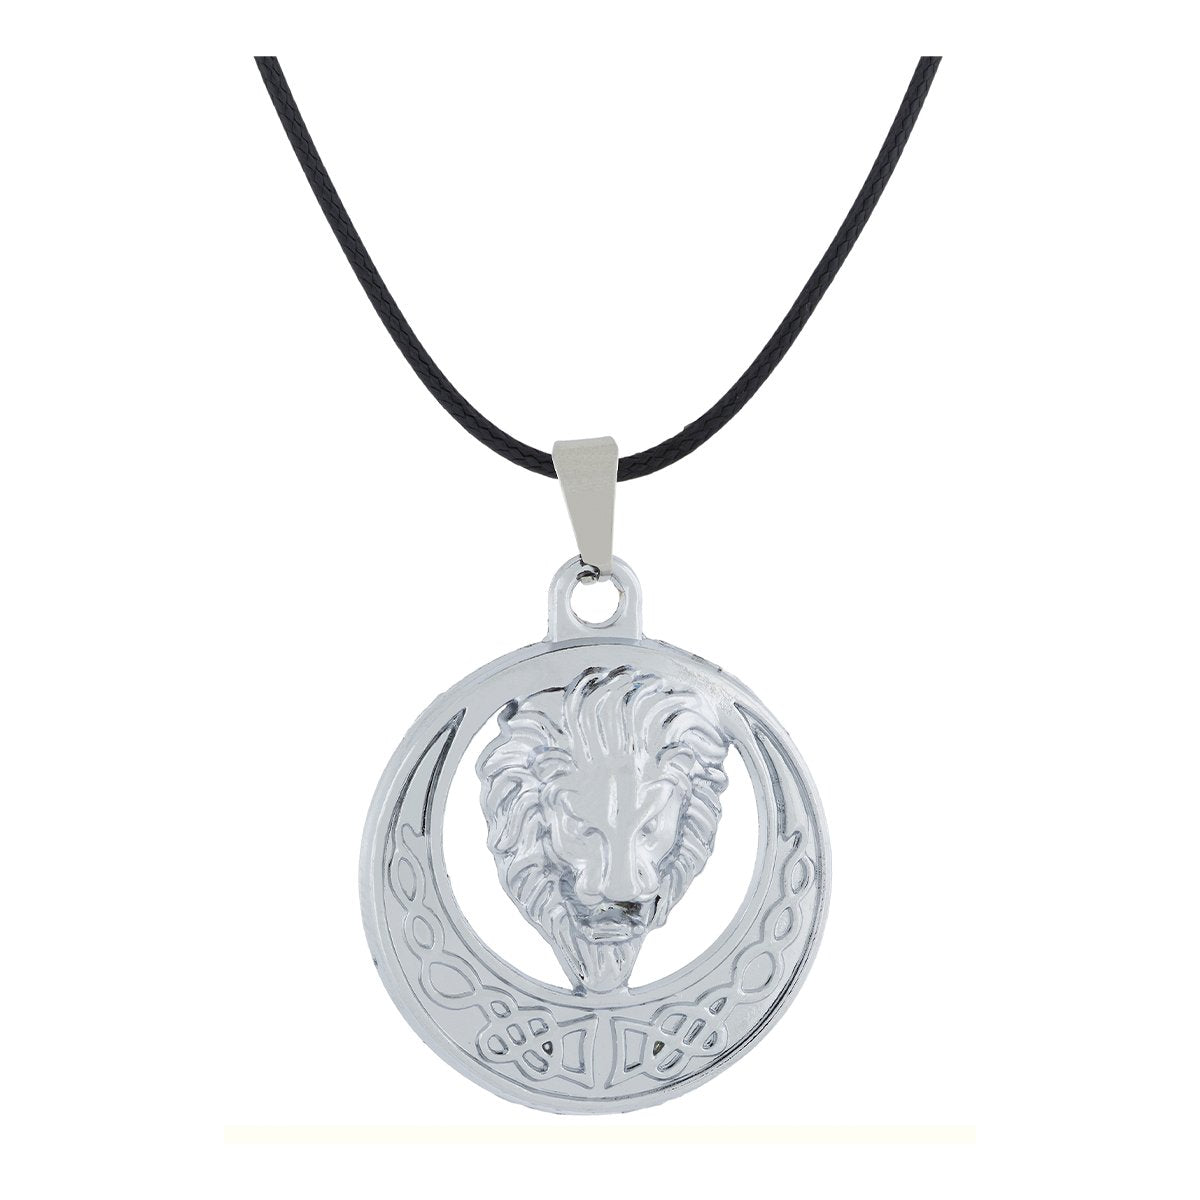 Punk Lion Dragon Oxidized Glossy Finish Stainless Steel Pendant Chain